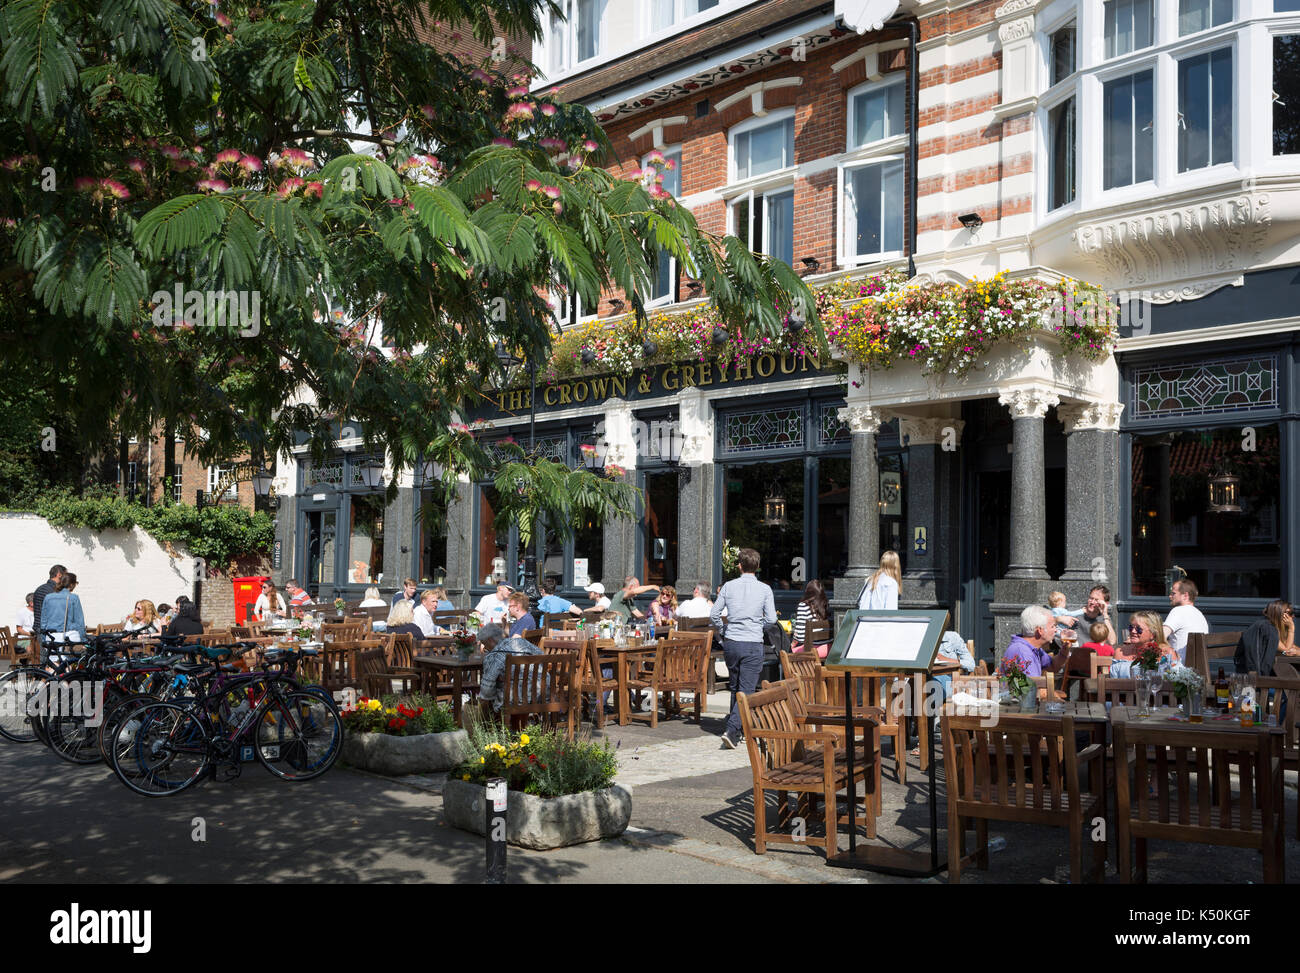 Summer drinkers enjoy a warm Sunday afternoon outside the newly refurbished Crown and Greyhound pub in Dulwich Village, on 2nd September 2017, in south London, England. 20 new bedrooms are available for short-stays but the pub gets its name from two former pubs in Dulwich Village, The Crown, and The Greyhound, which were across the street from each other up to the 1890s. The Crown and Greyhound is a Grade II listed public house at 73 Dulwich Village. Stock Photo